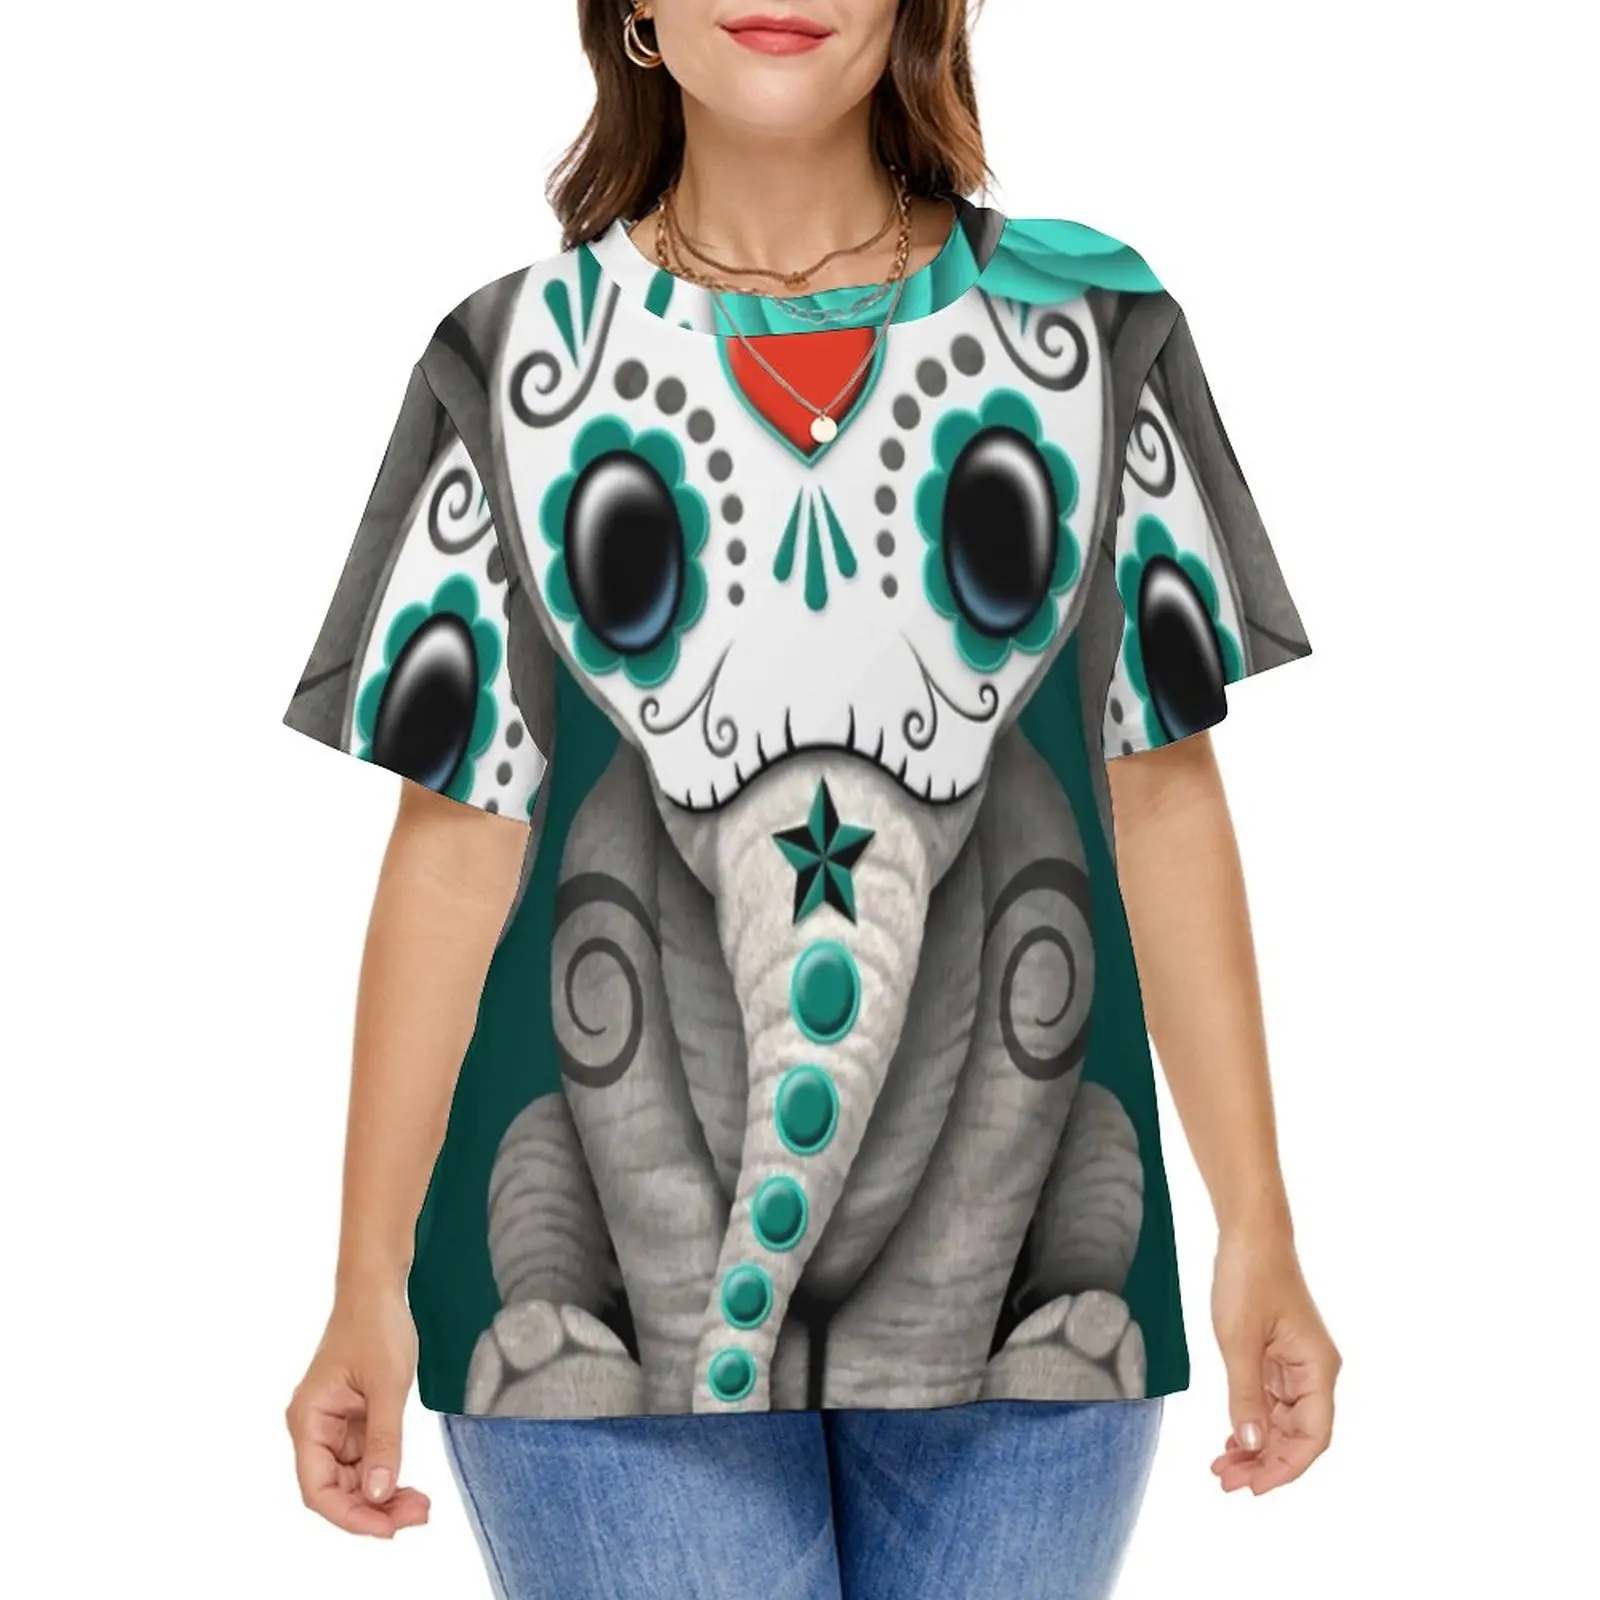 Sugar Skull Baby Elephant T-Shirt Day of The Dead Elegant T Shirts Short Sleeve Graphic Tops Women Casual Tees Plus Size 5XL 6XL